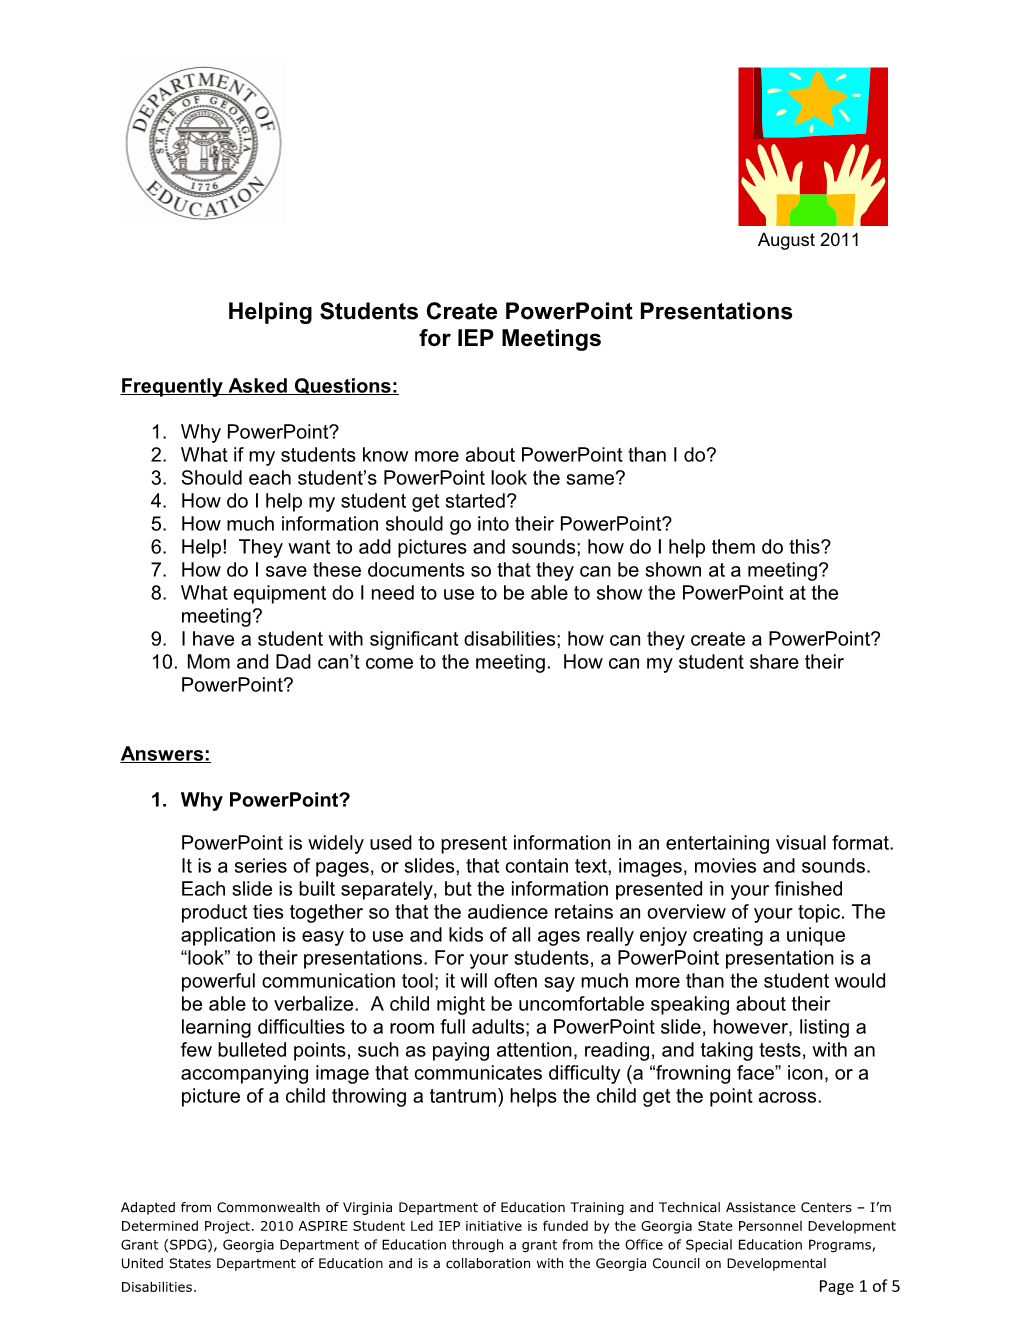 It S All About Me: Helping Students Create Powerpoint Presentations for IEP Meetings